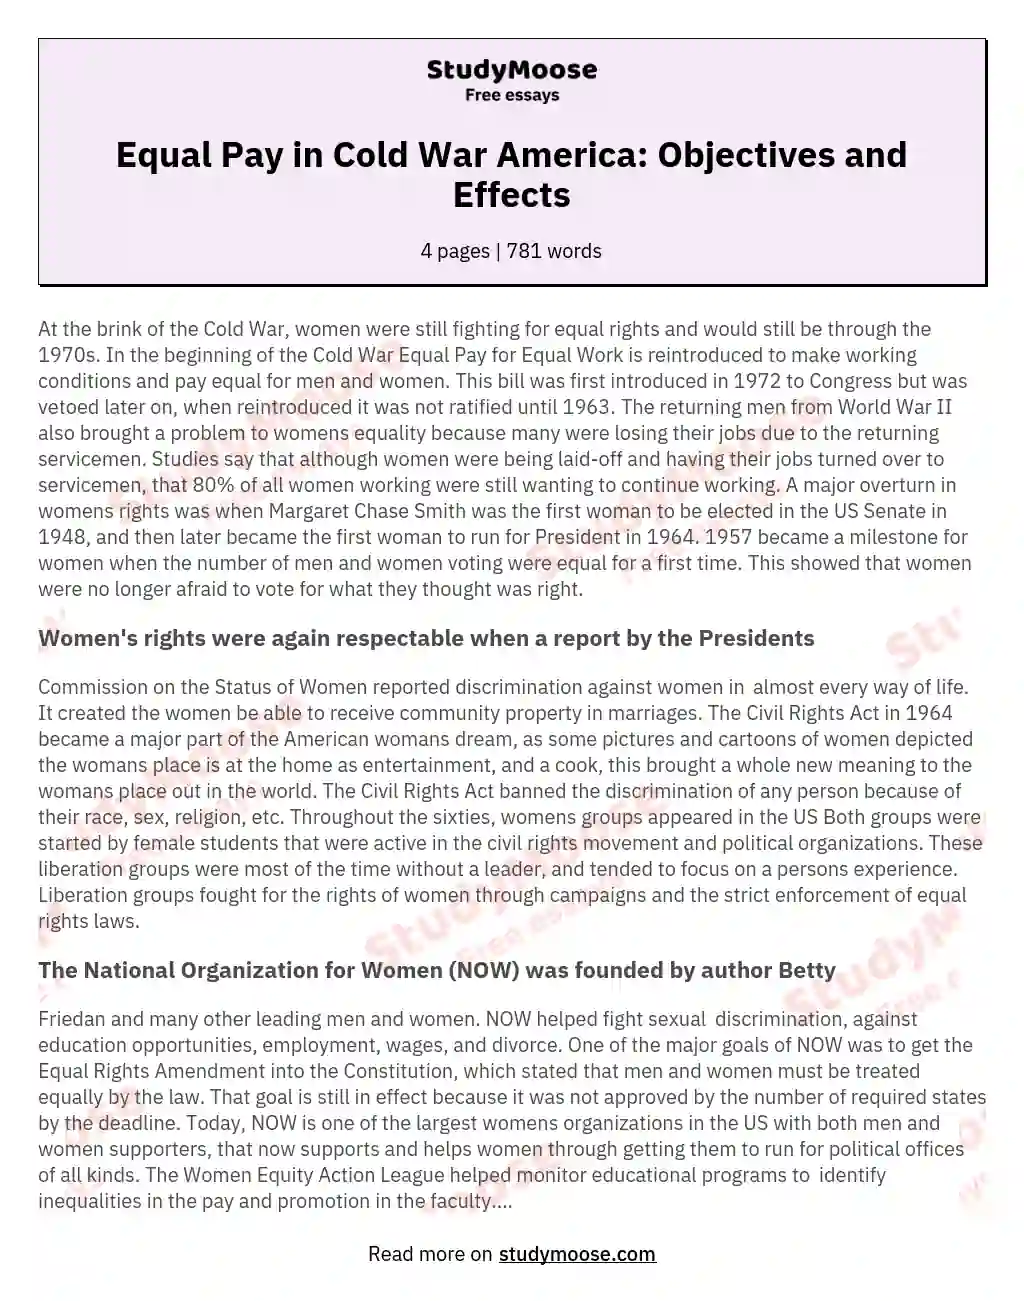 Equal Pay in Cold War America: Objectives and Effects essay